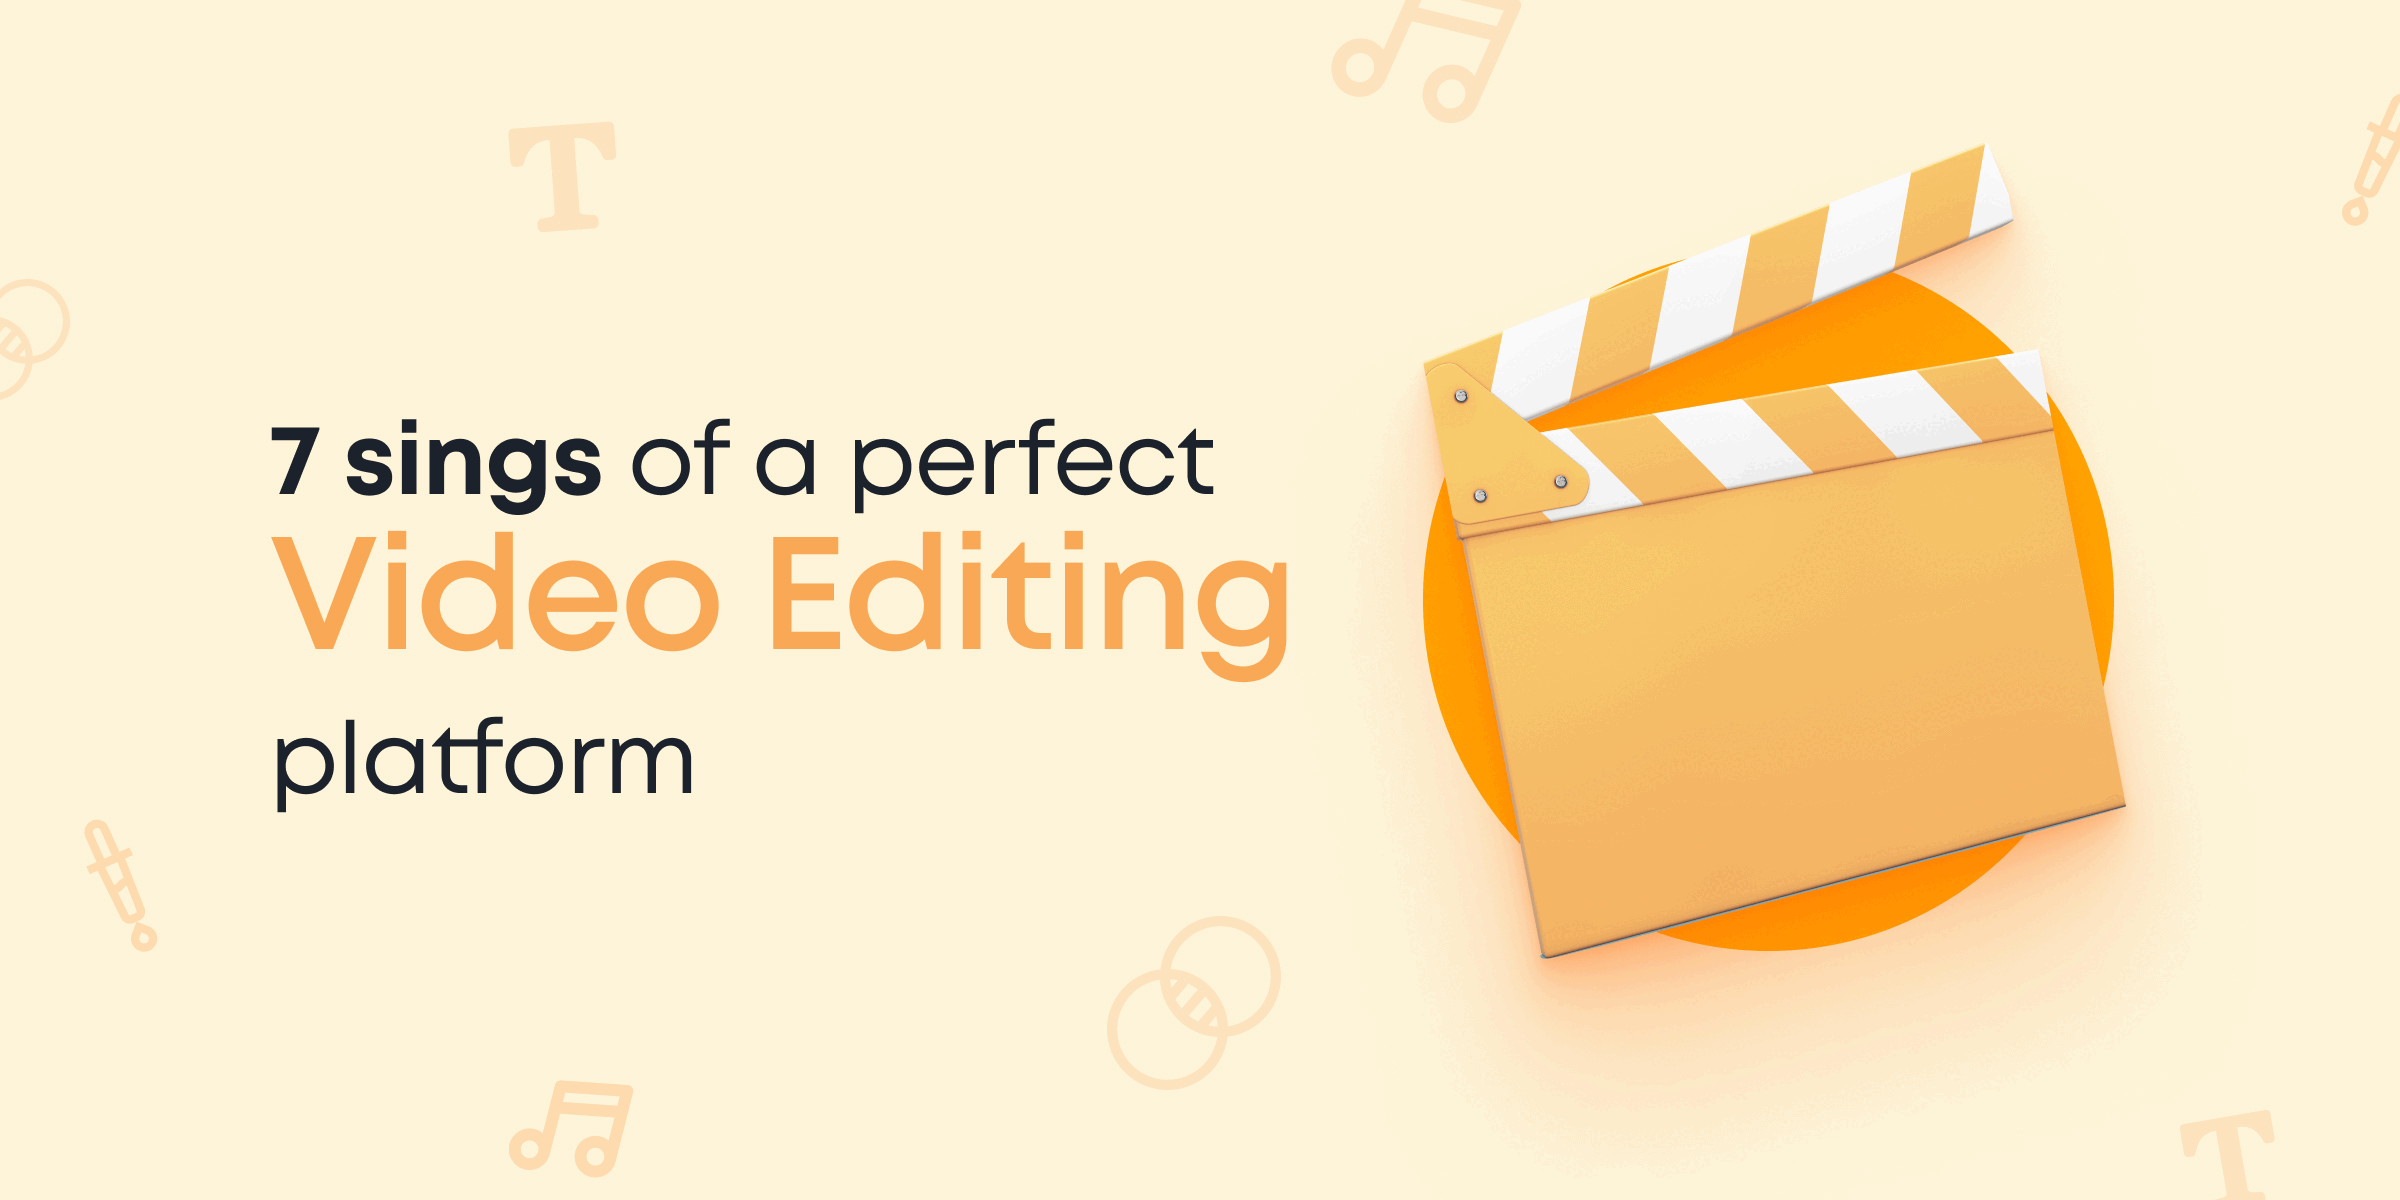 7 Signs of a Perfect Video Editing Platform